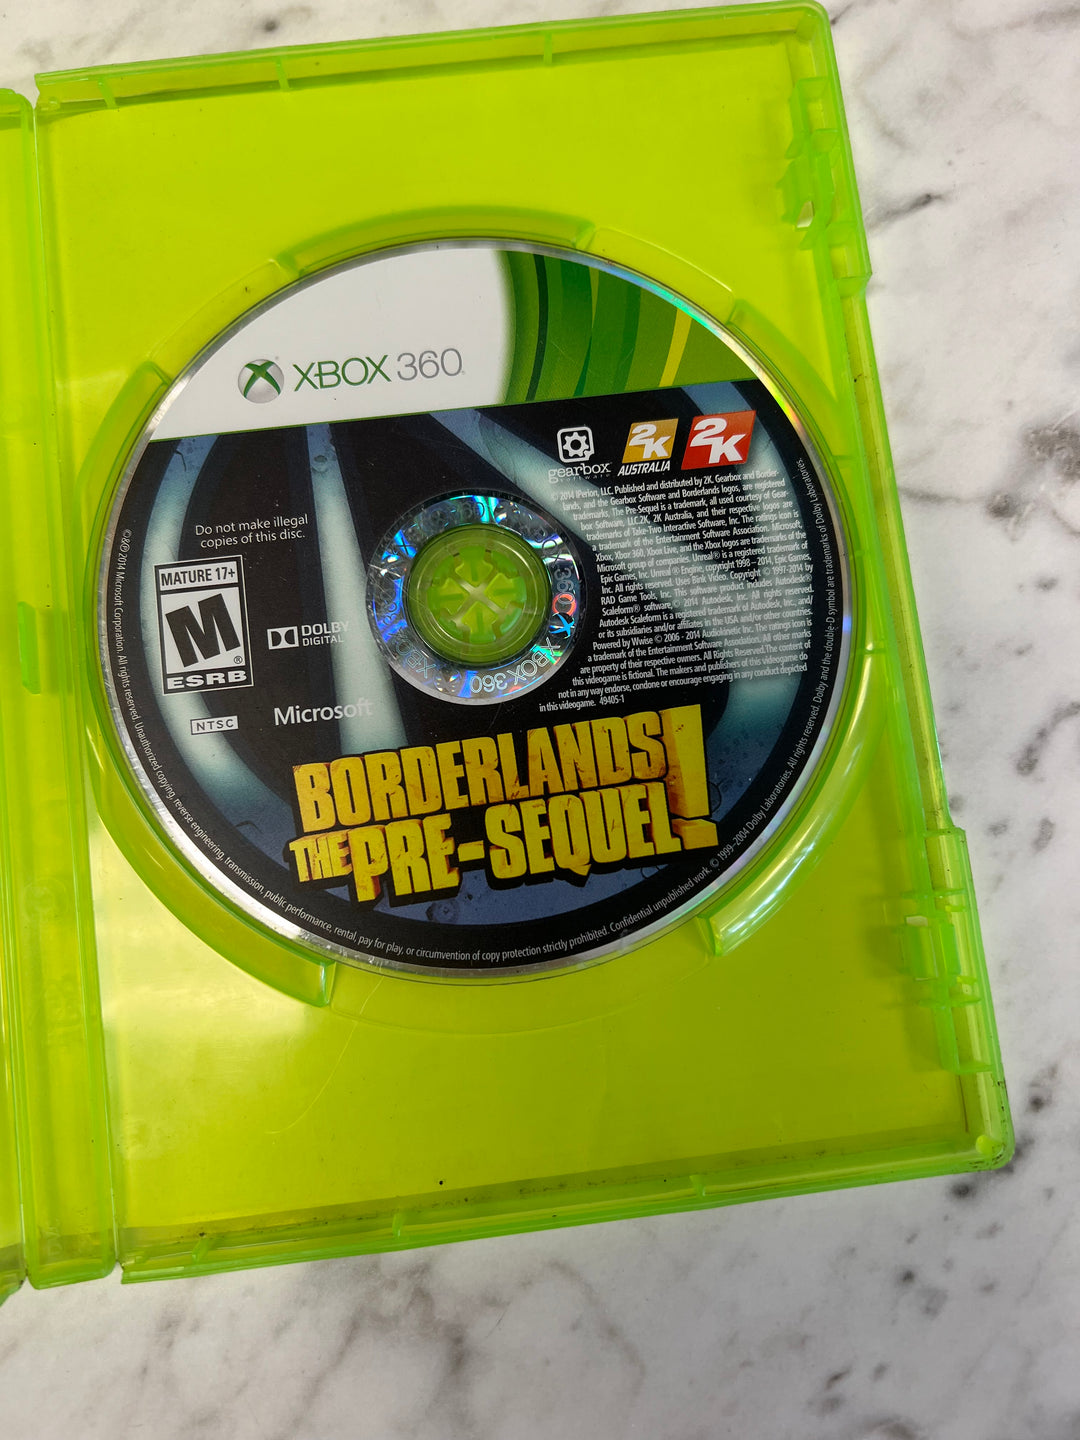 Borderlands the Pre-Sequel for Microsoft Xbox 360 in case. Tested and Working.     DO61124